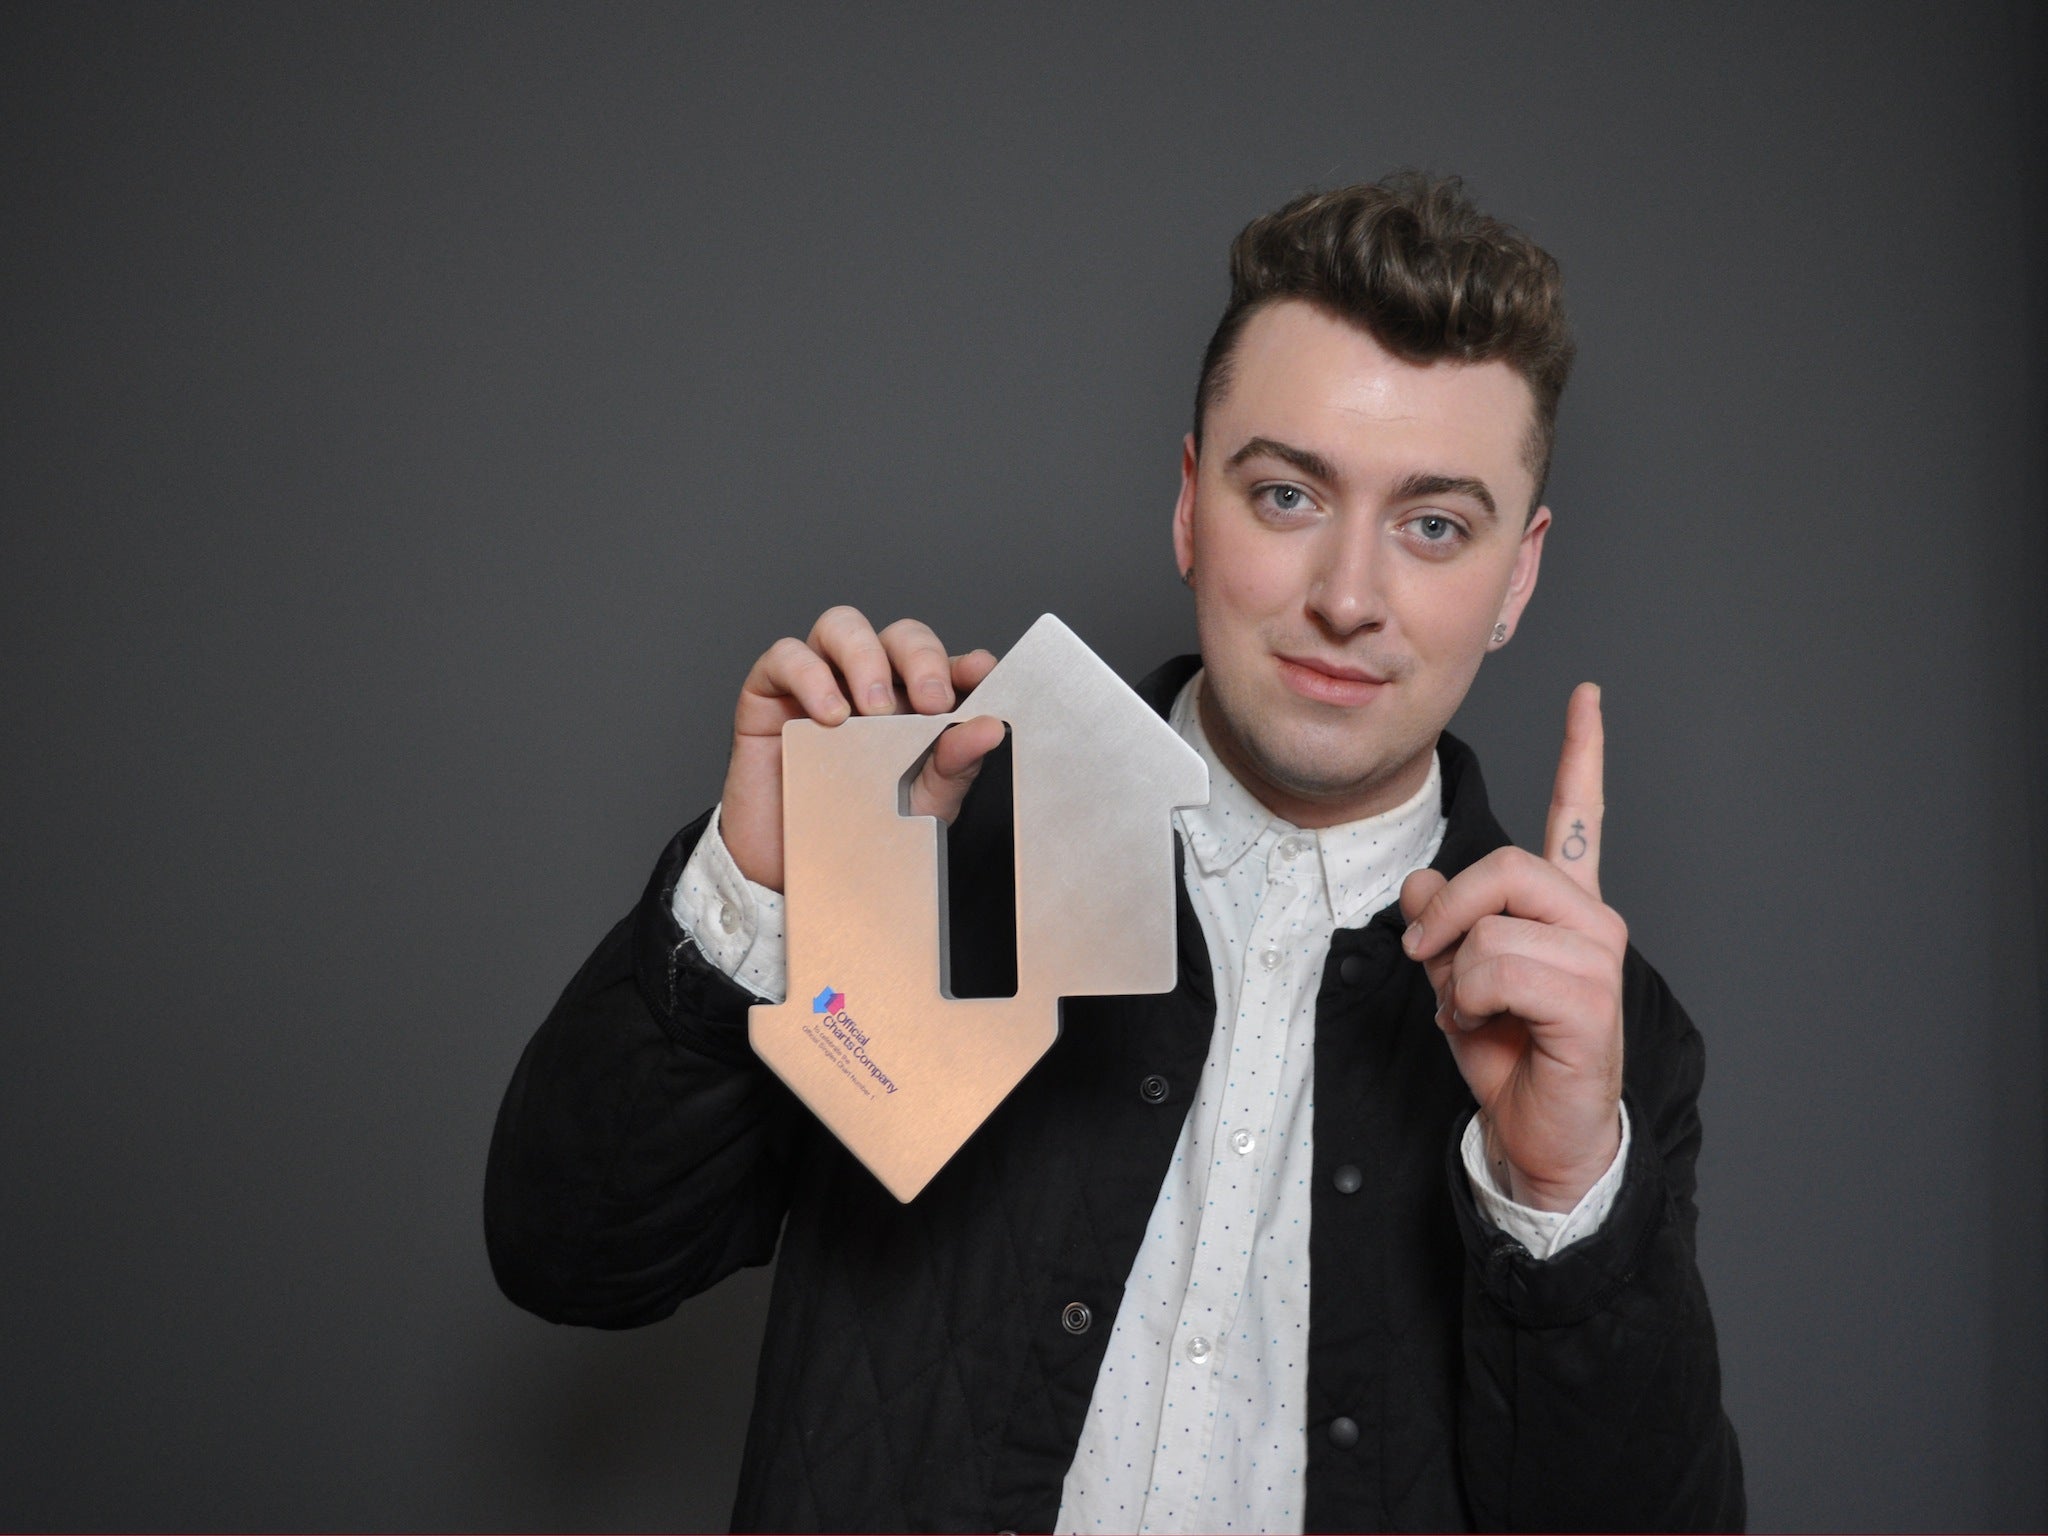 Sam Smith's In The Lonely Hour has sold more than one million copies in both the UK and the US